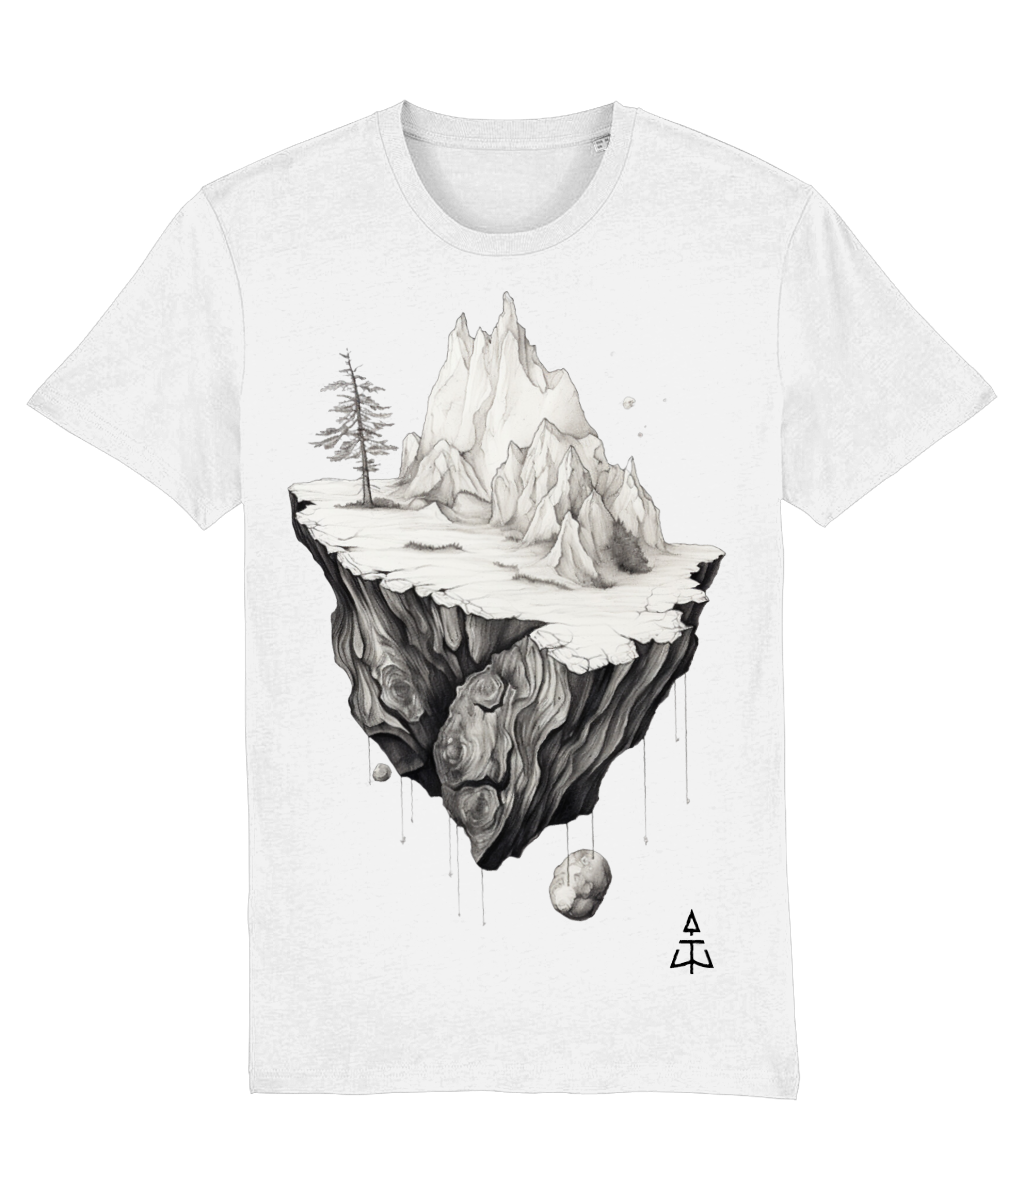 Growing Crystals Graphic Tee